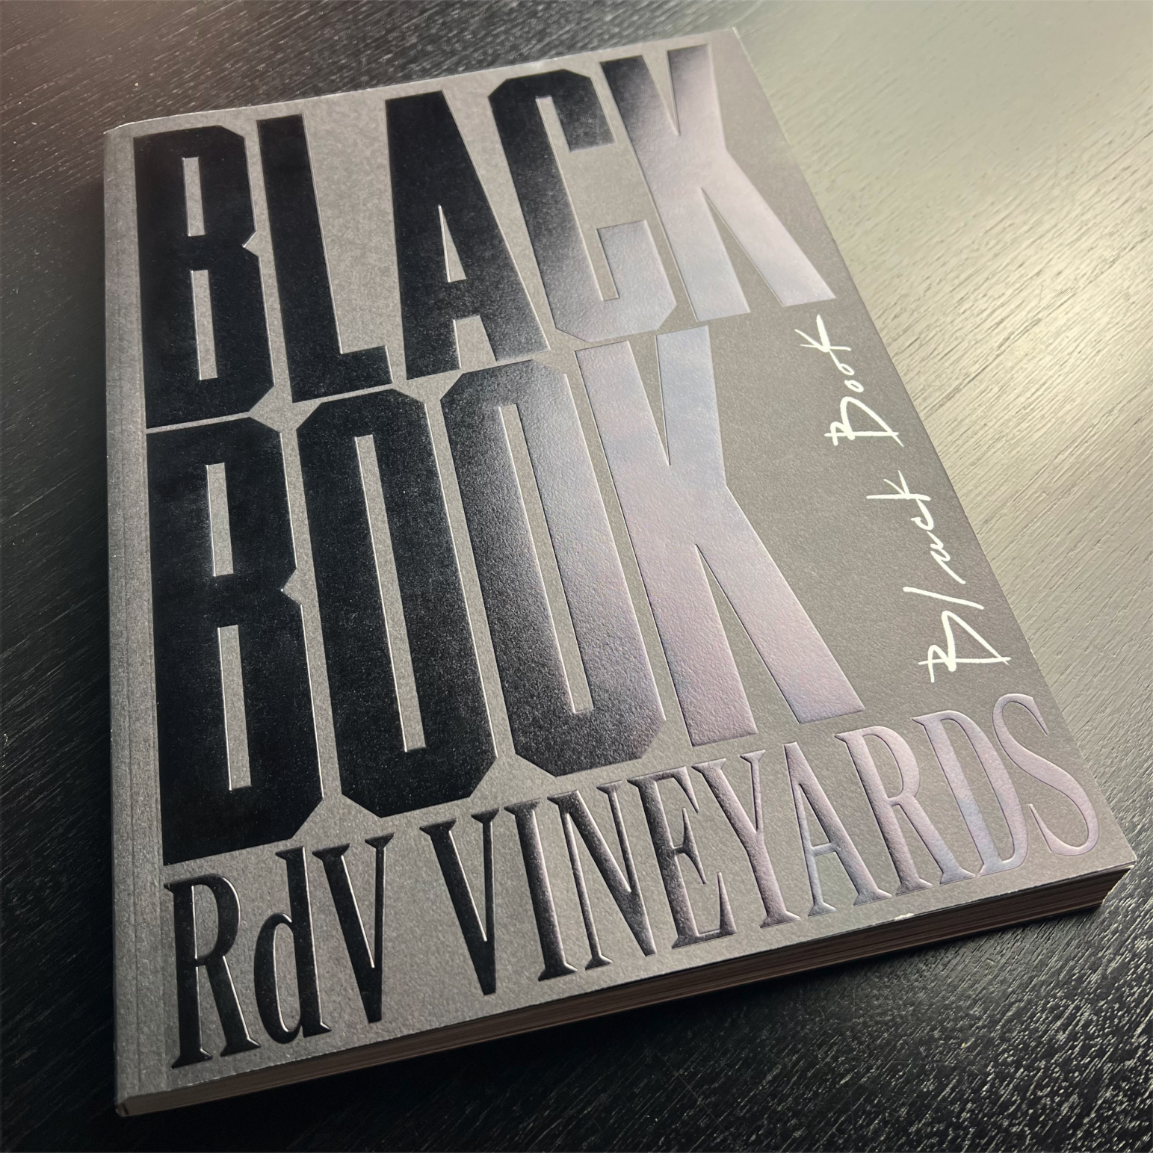 A sleek, hardcover book titled 'Black Book No. 1 RDV Vineyards' rests on a wooden surface, its cover exuding an aura of luxury and exclusivity.